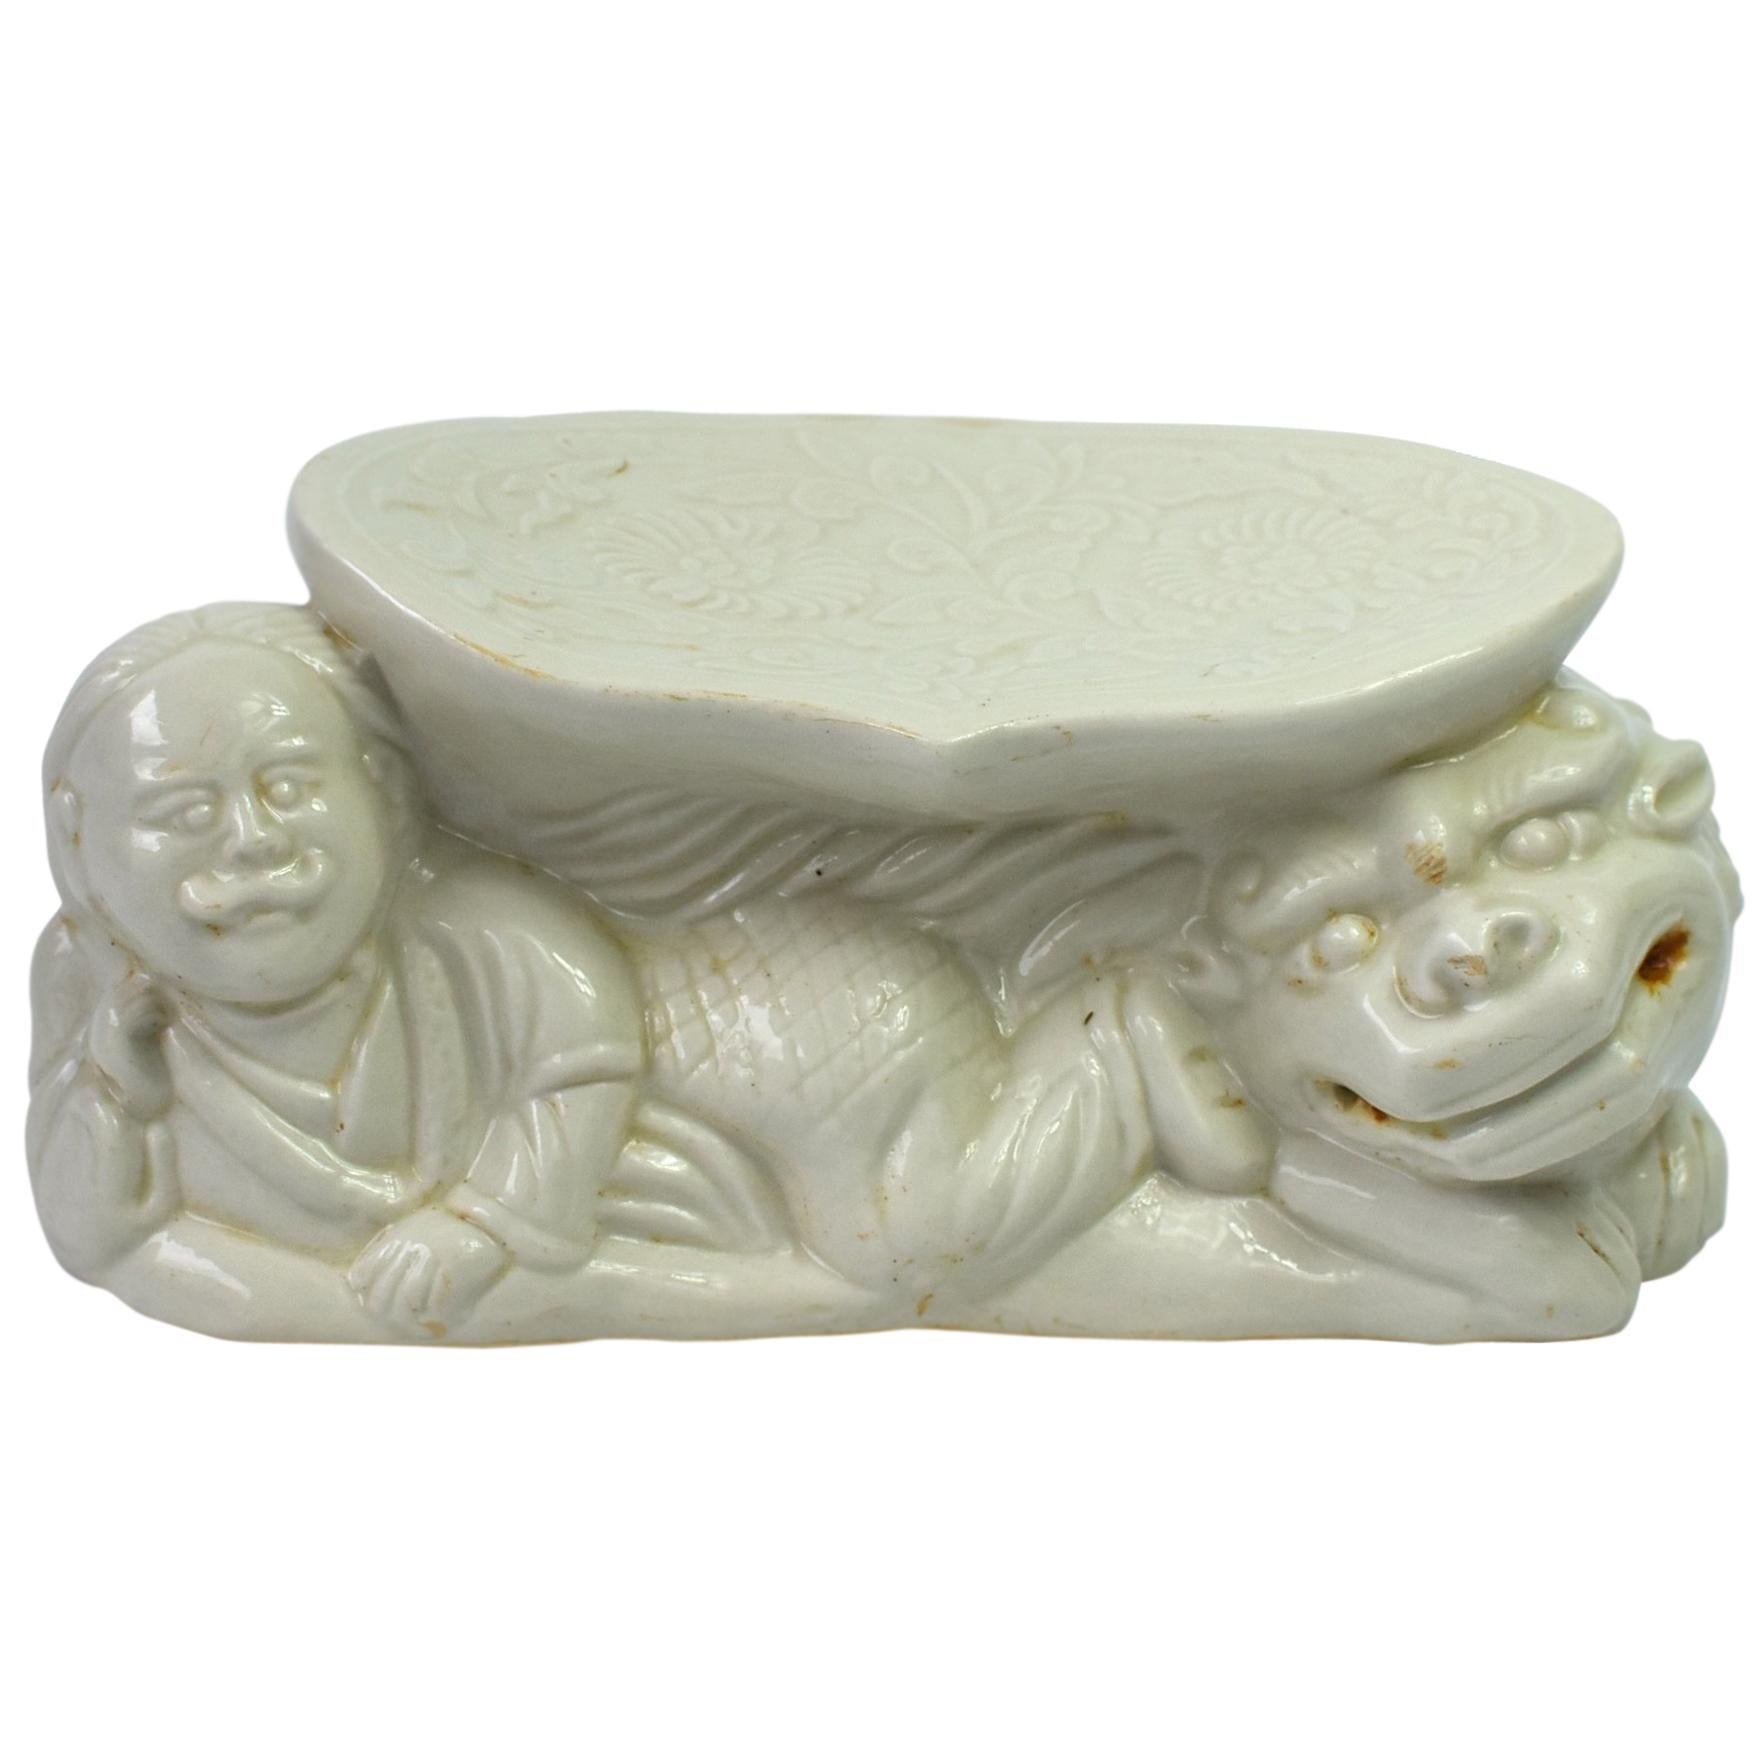 Ding Kiln Ceramic Pillow Song Style Man and Foo Dog